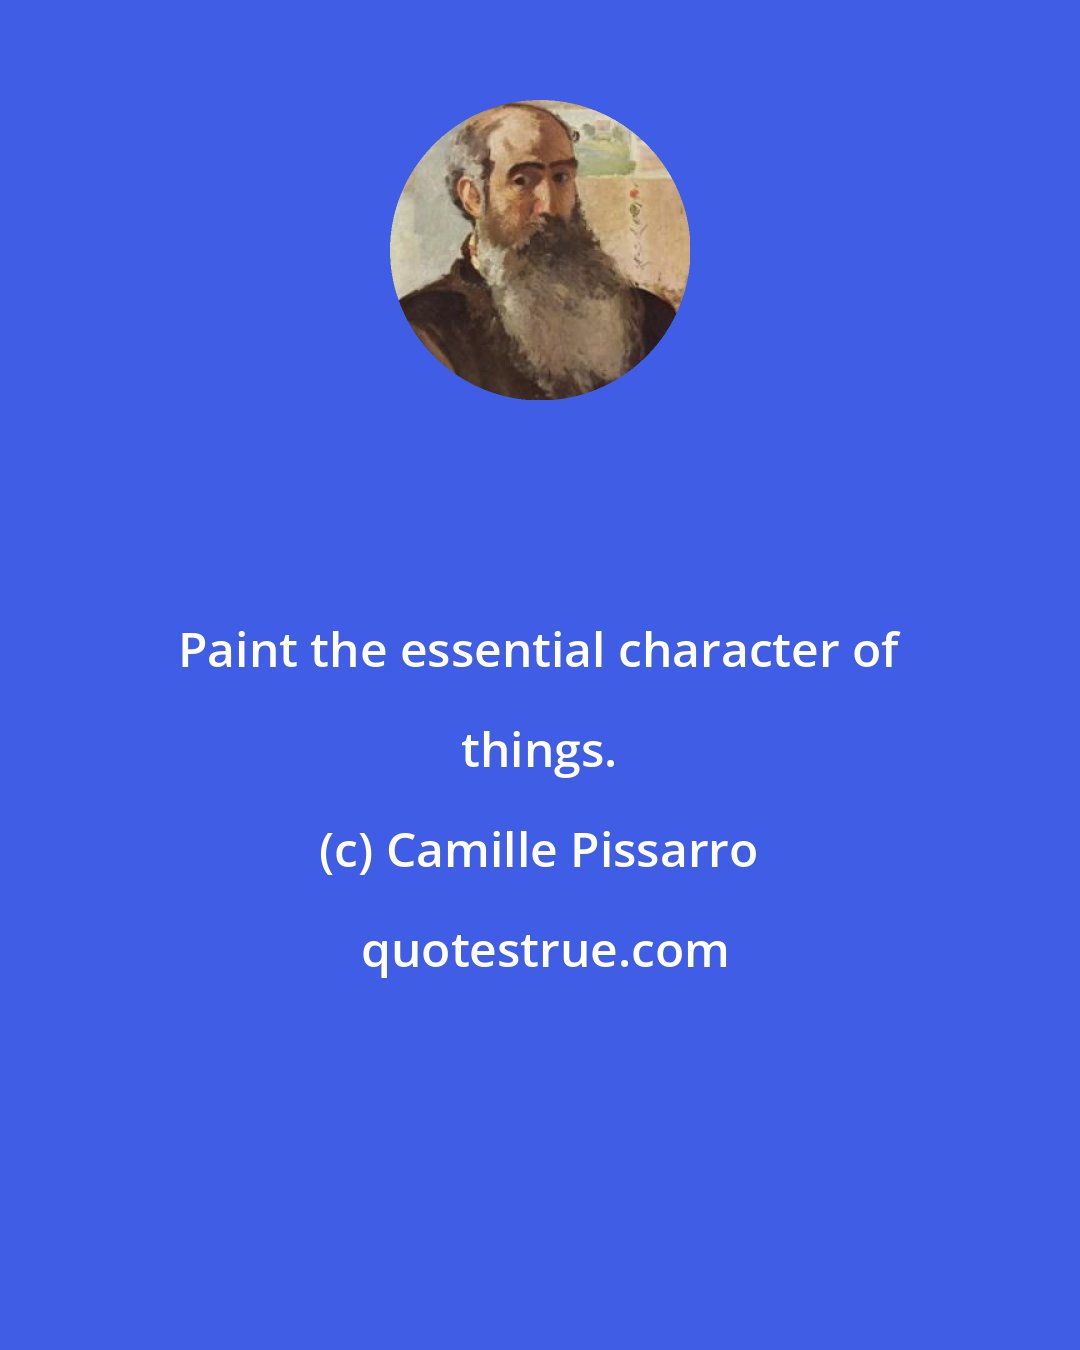 Camille Pissarro: Paint the essential character of things.